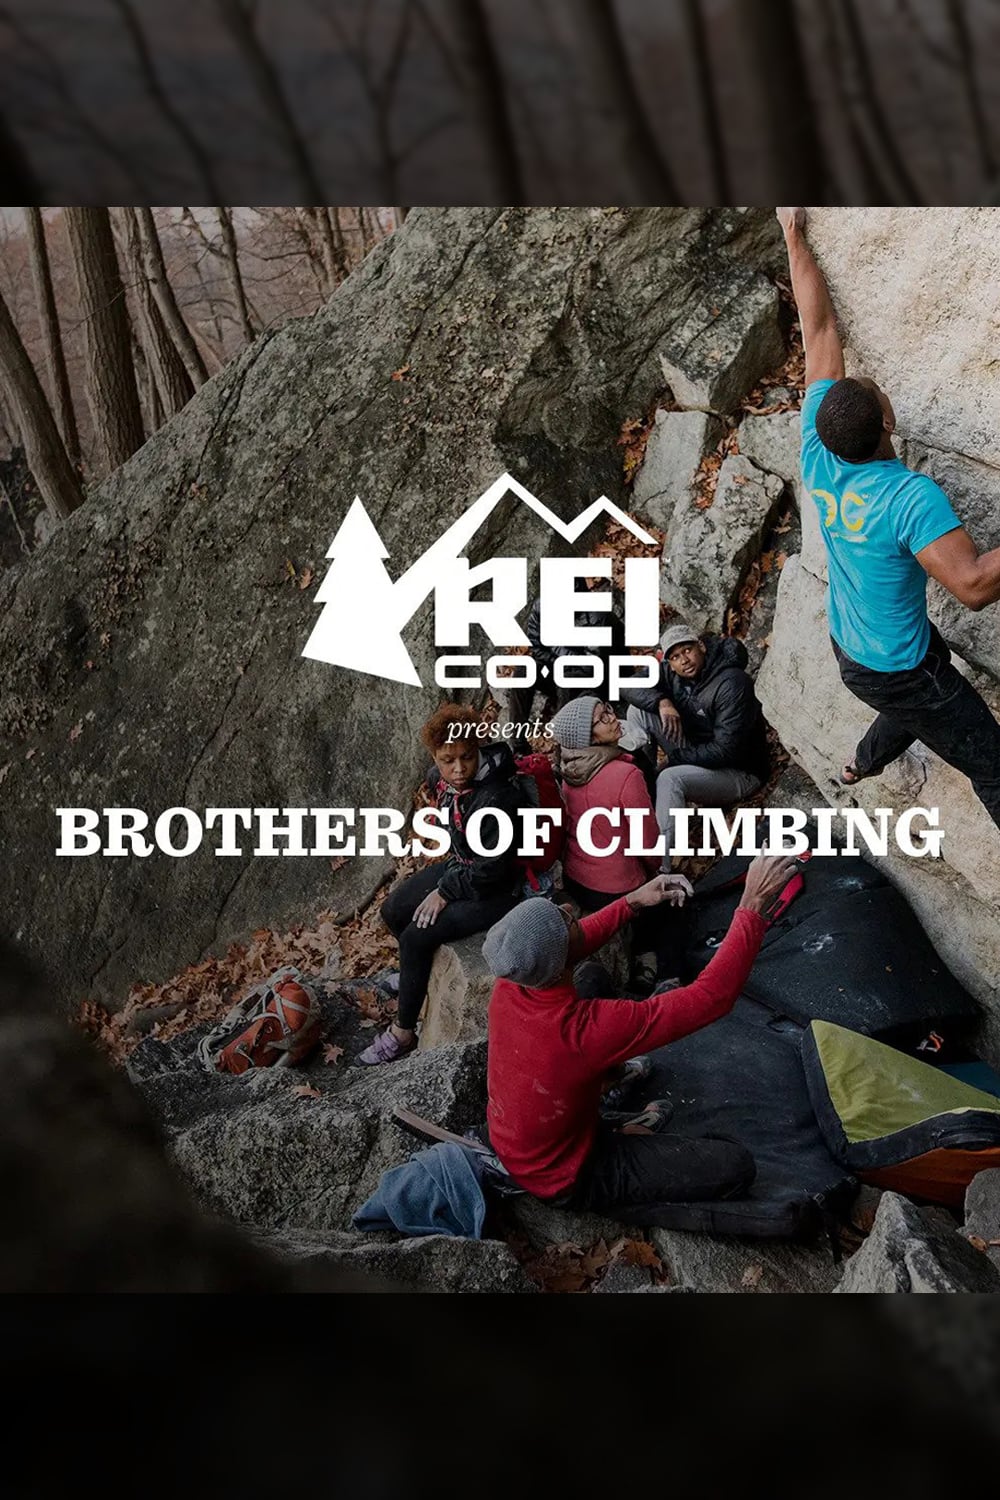 Brothers of Climbing